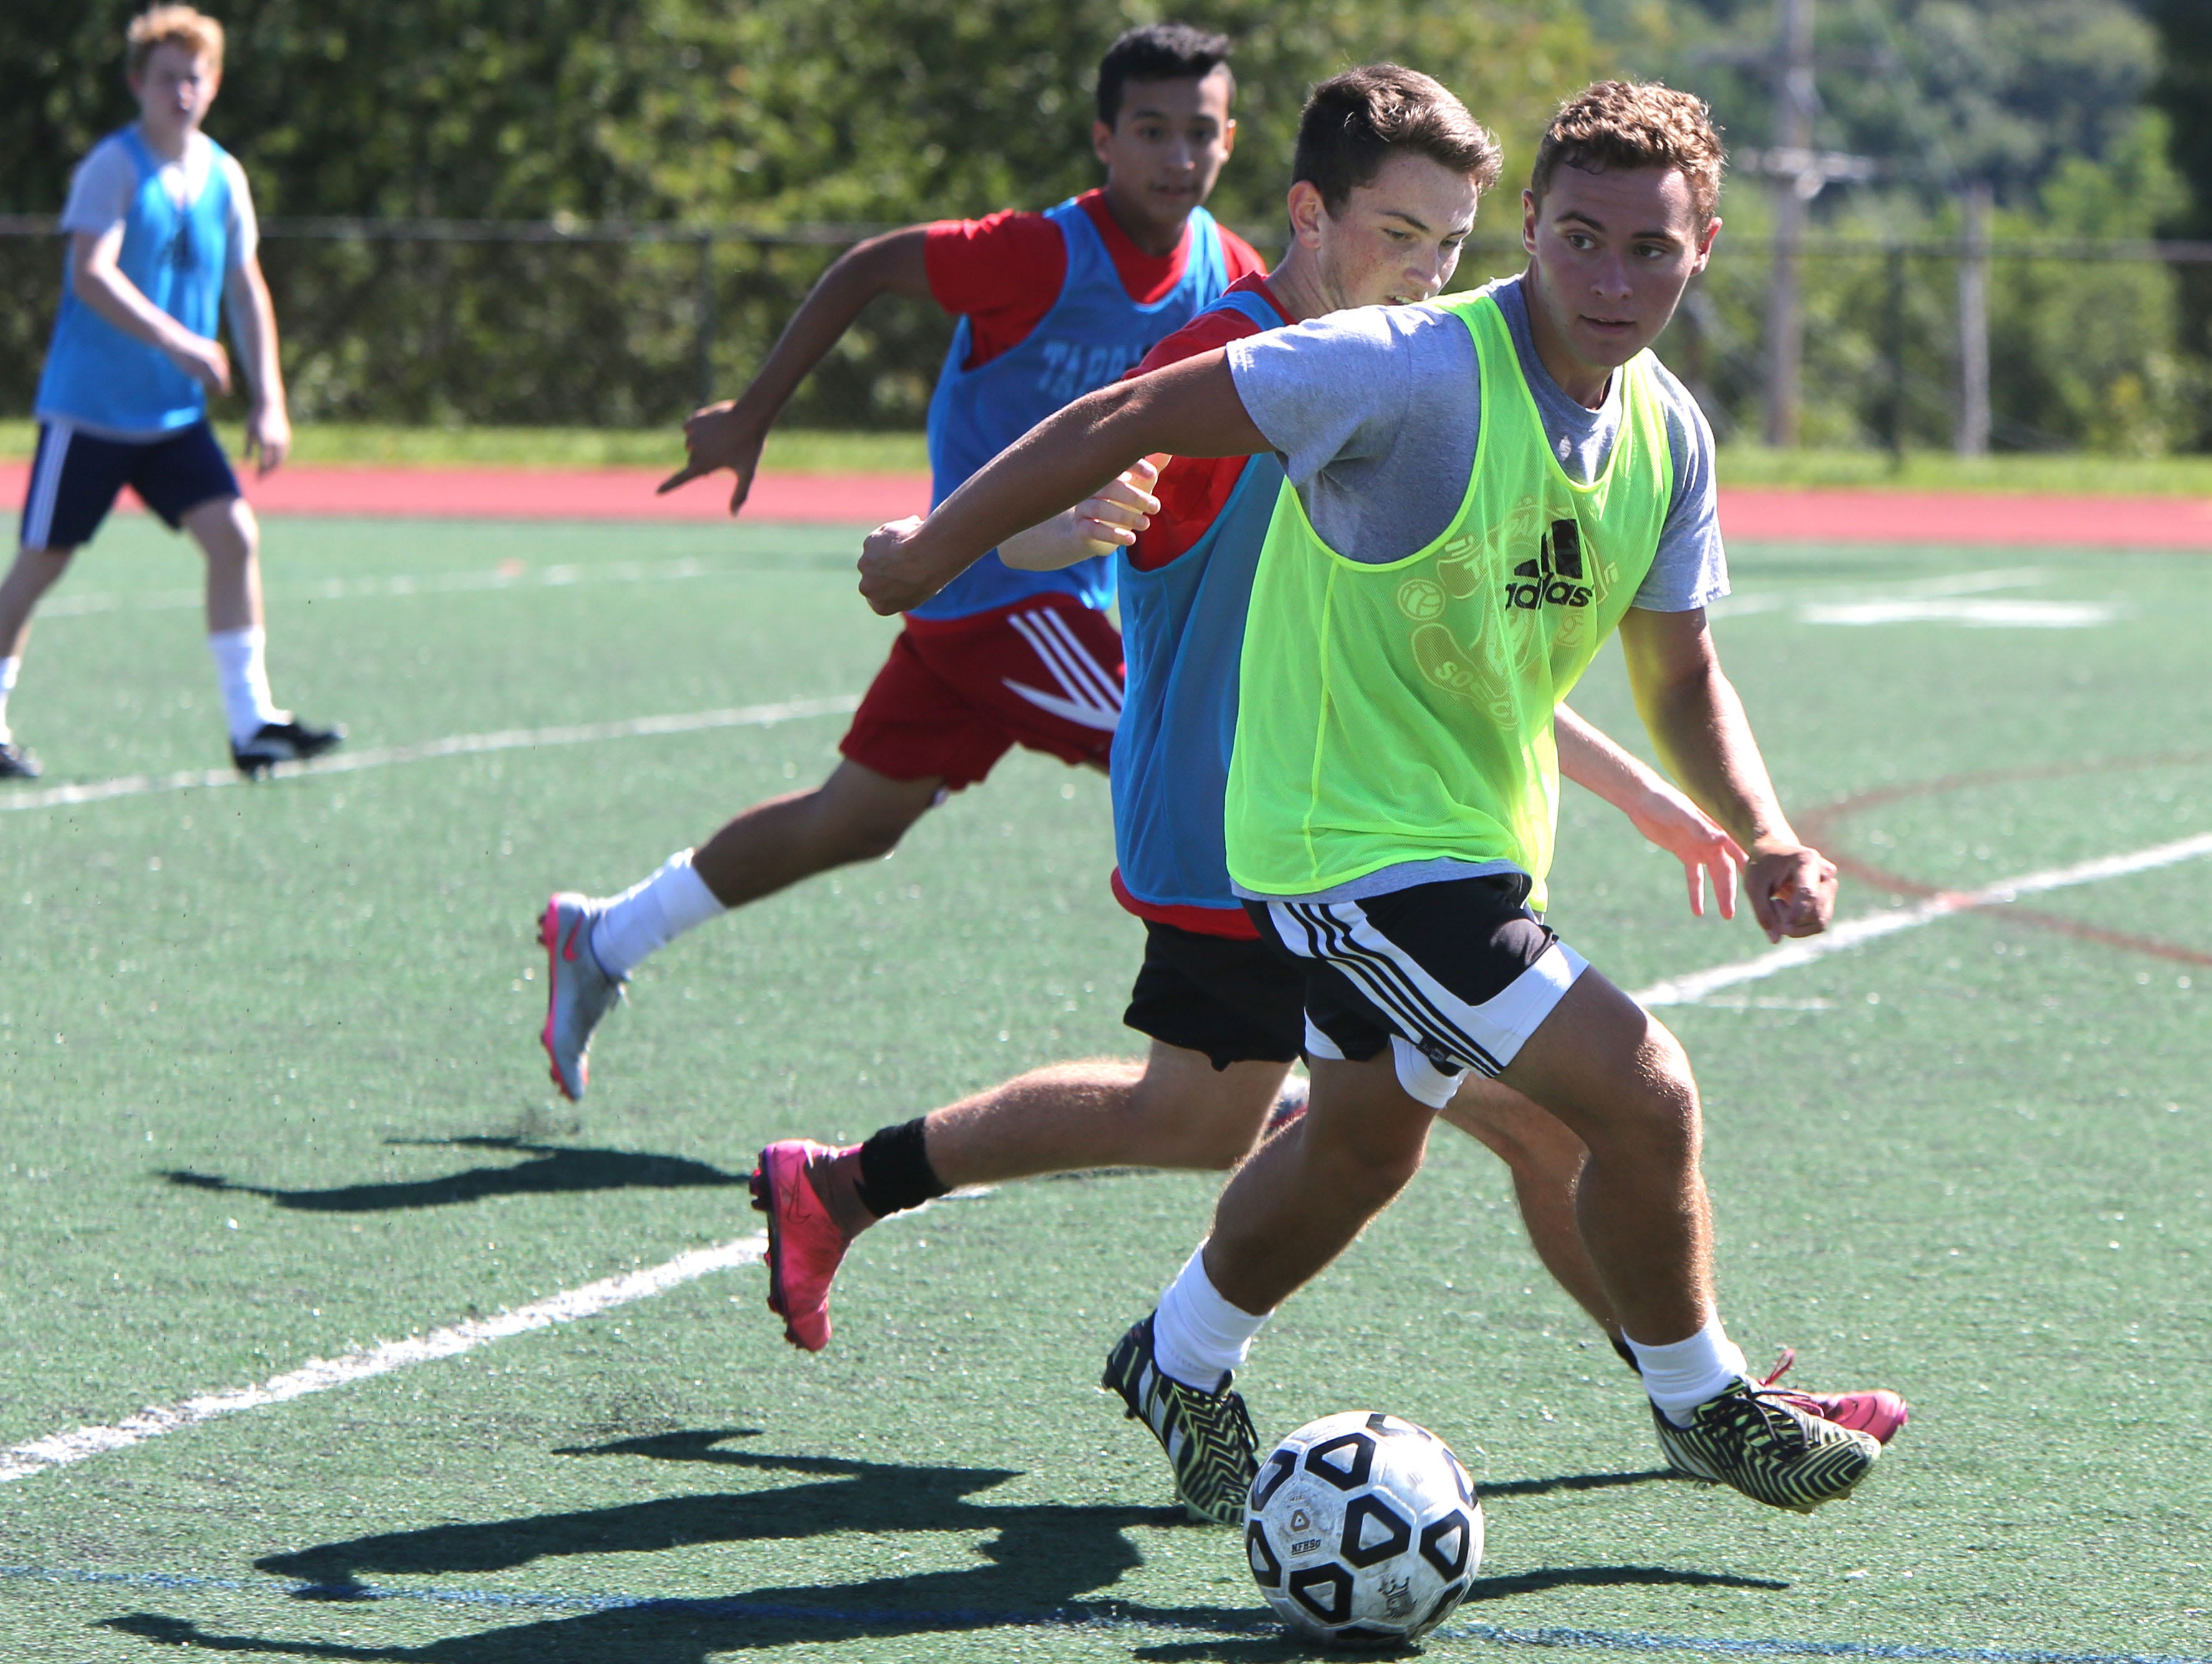 Tappan Zee junior Joe Stahl during the first day of soccer practice at Tappan Zee High School Aug. 22, 2016.